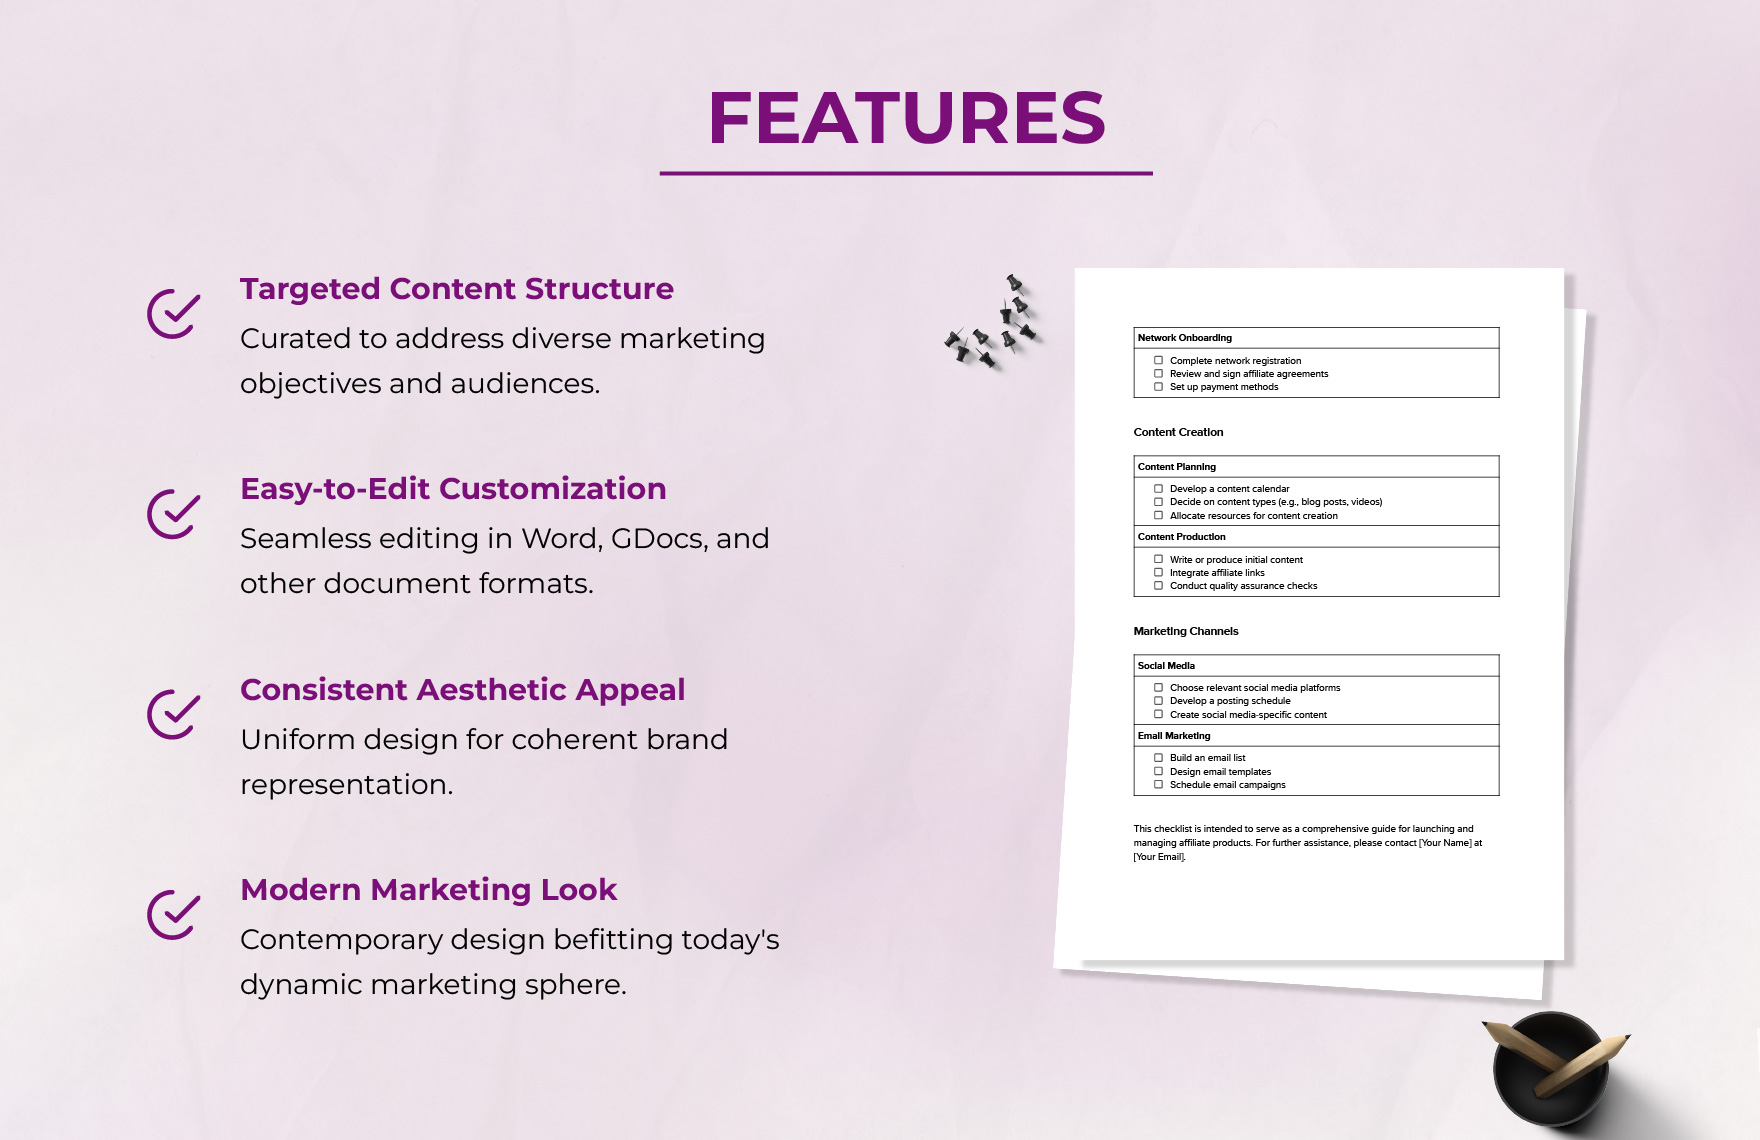 Marketing Affiliate Product Checklist Template